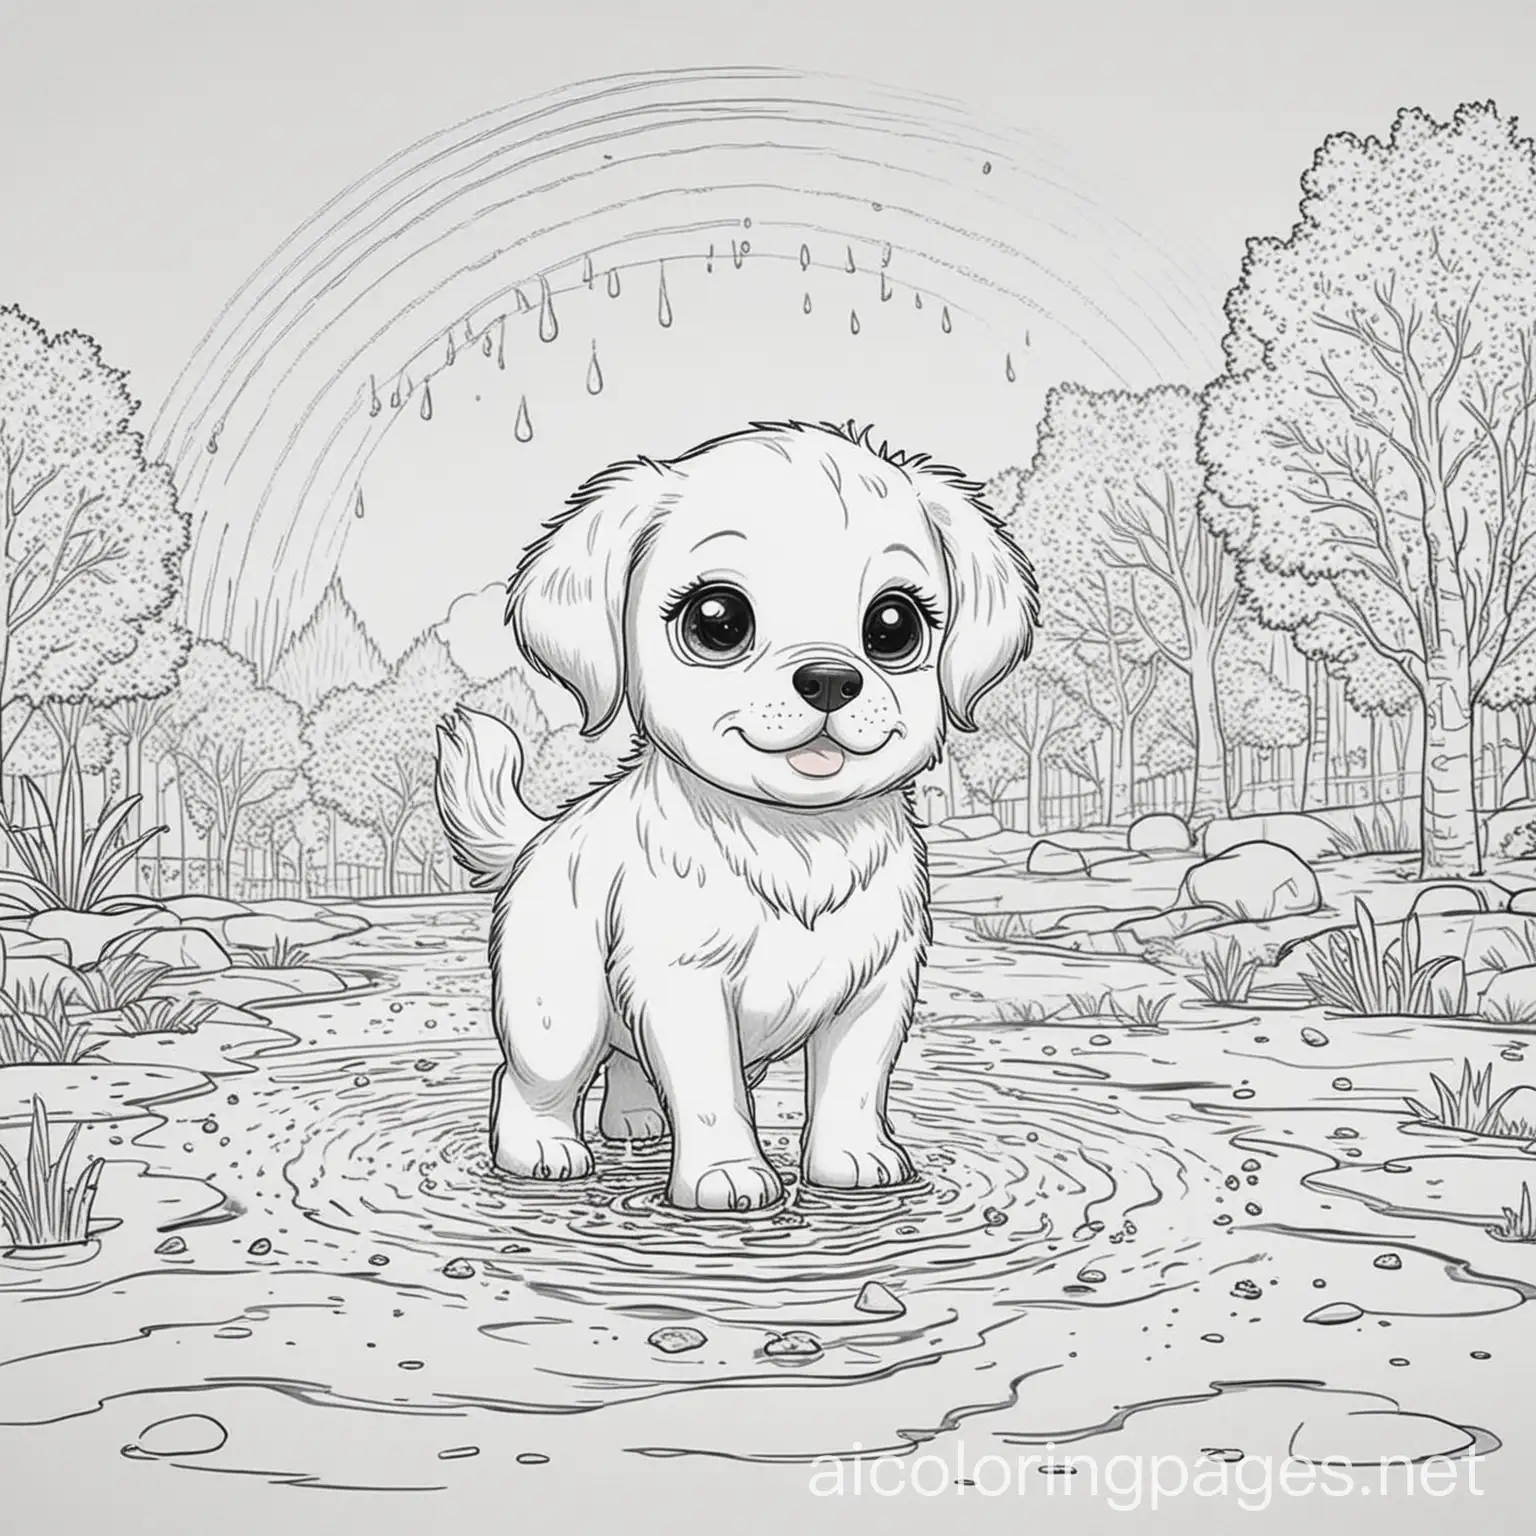 Cute puppy splashing in a puddle under a rainbow on a sunny day in a park scene , Coloring Page, black and white, line art, white background, Simplicity, Ample White Space. The background of the coloring page is plain white to make it easy for young children to color within the lines. The outlines of all the subjects are easy to distinguish, making it simple for kids to color without too much difficulty, Coloring Page, black and white, line art, white background, Simplicity, Ample White Space. The background of the coloring page is plain white to make it easy for young children to color within the lines. The outlines of all the subjects are easy to distinguish, making it simple for kids to color without too much difficulty